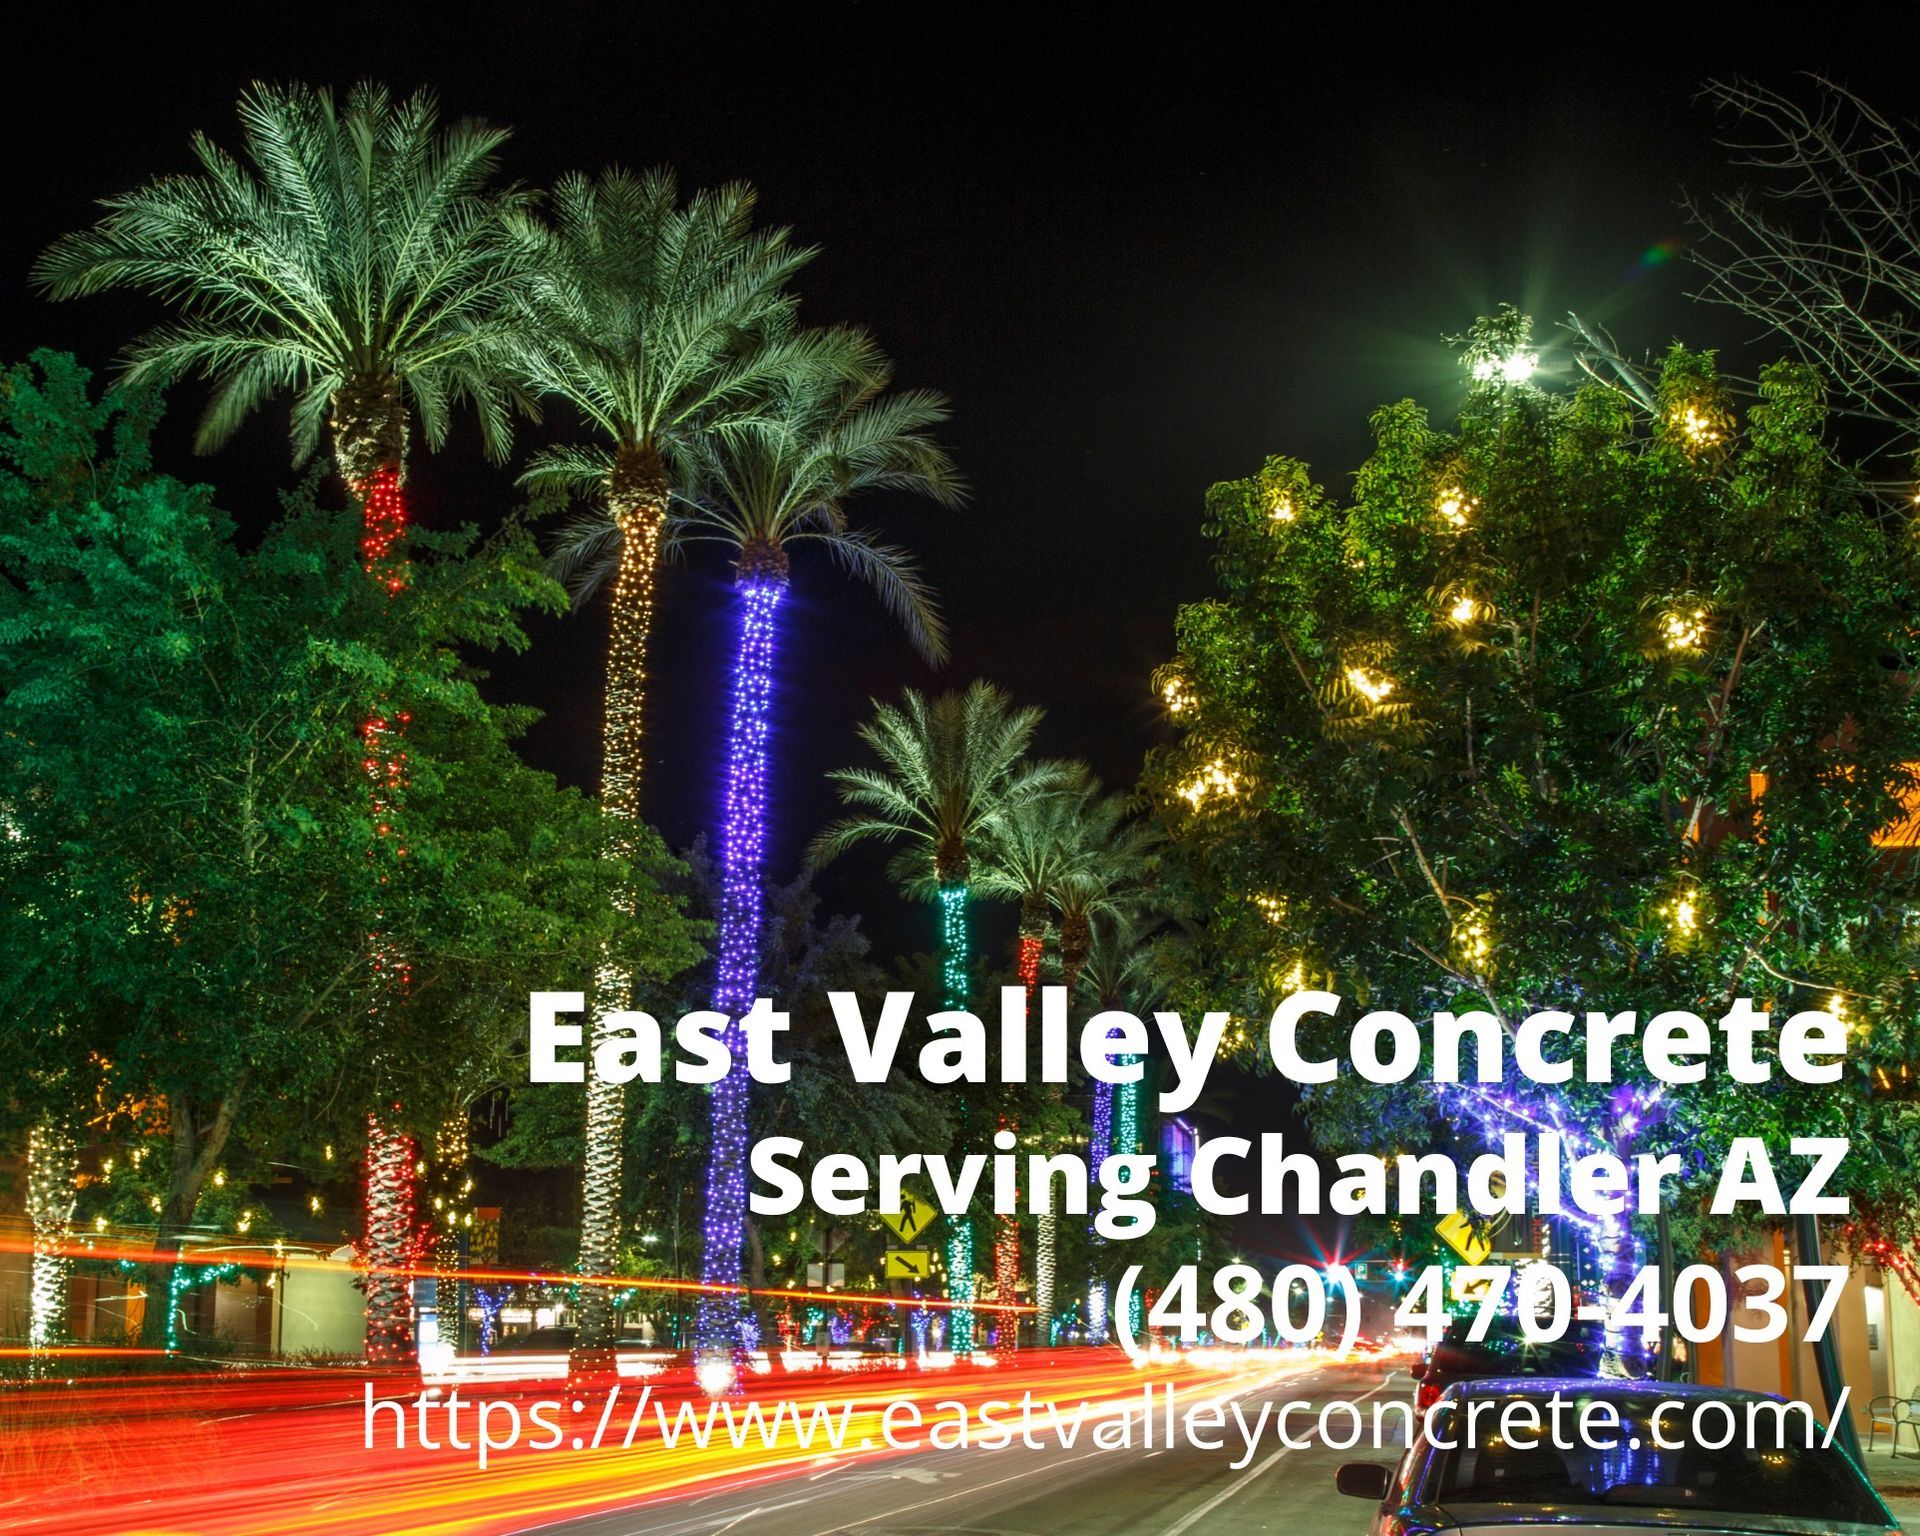 holiday season in Chandler AZ with the contact details of East Valley Concrete